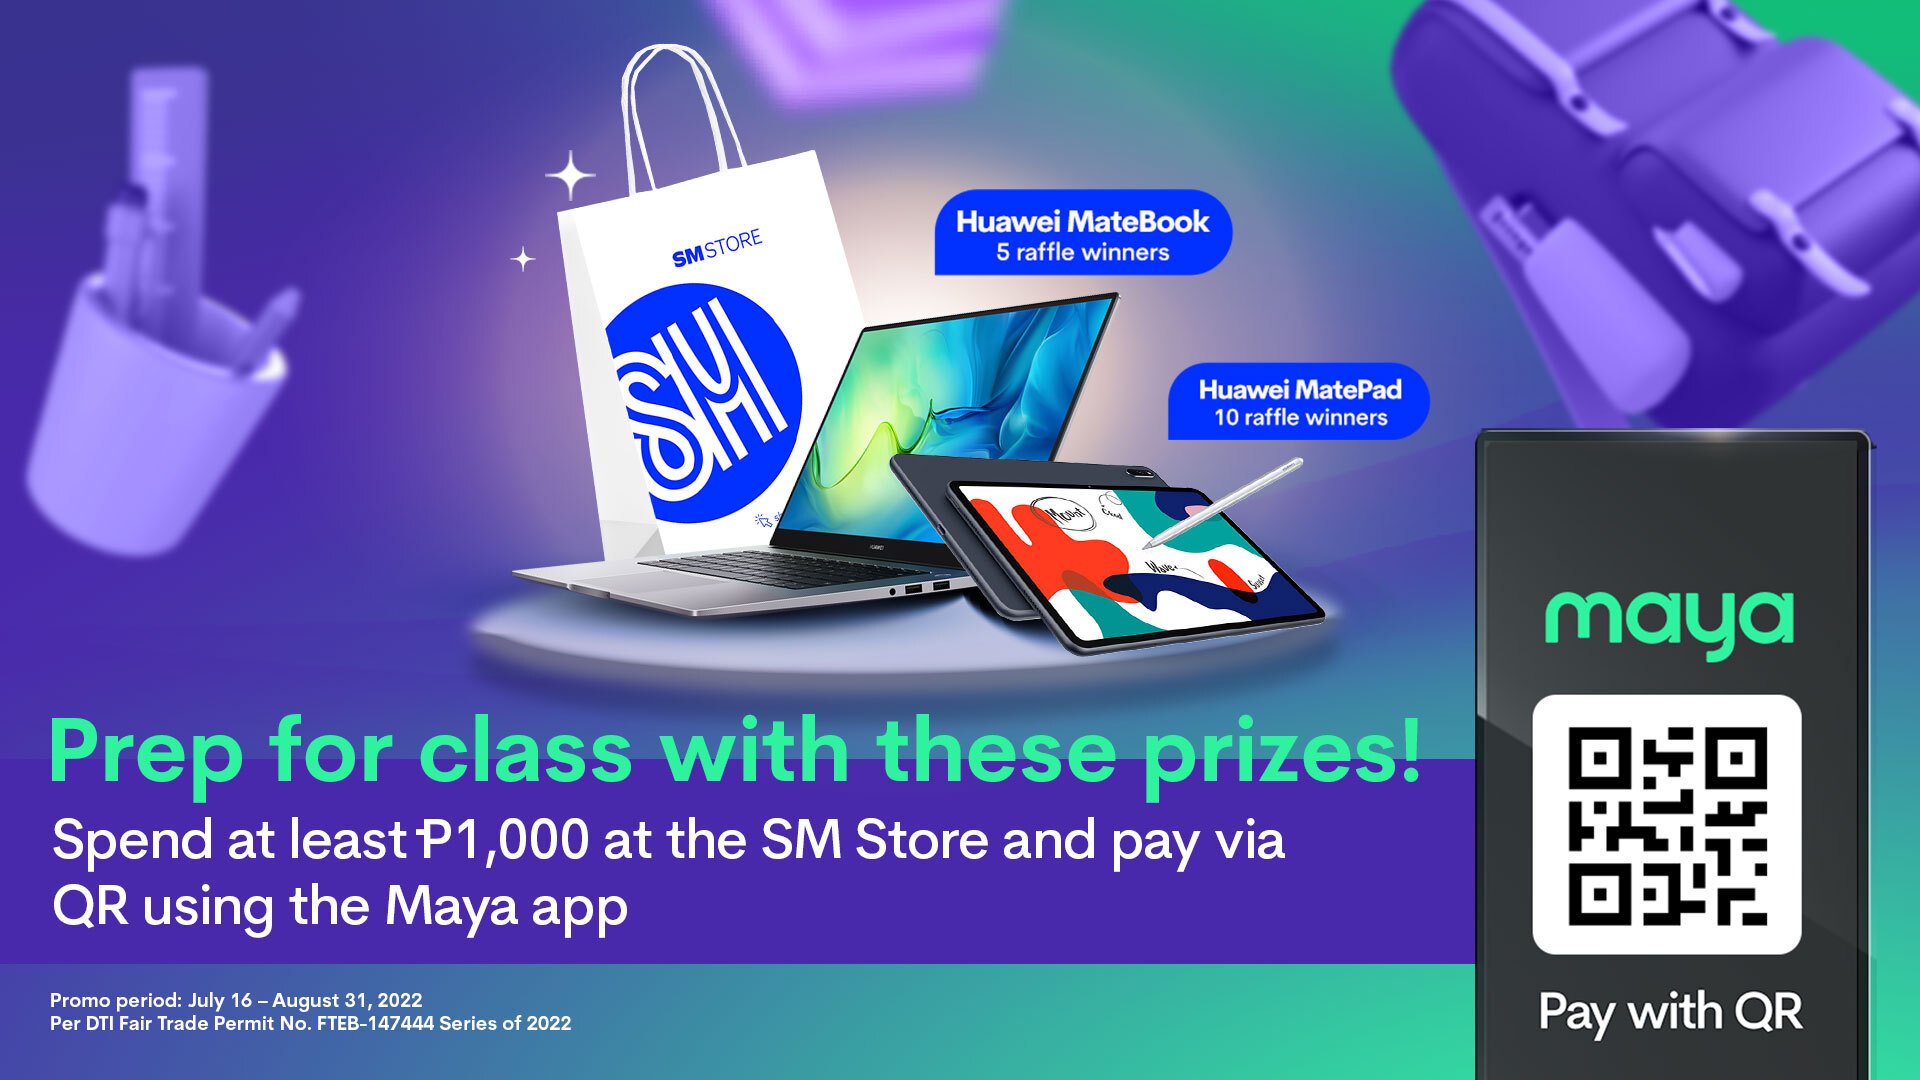 Win your next back to school gadgets at the SM Store